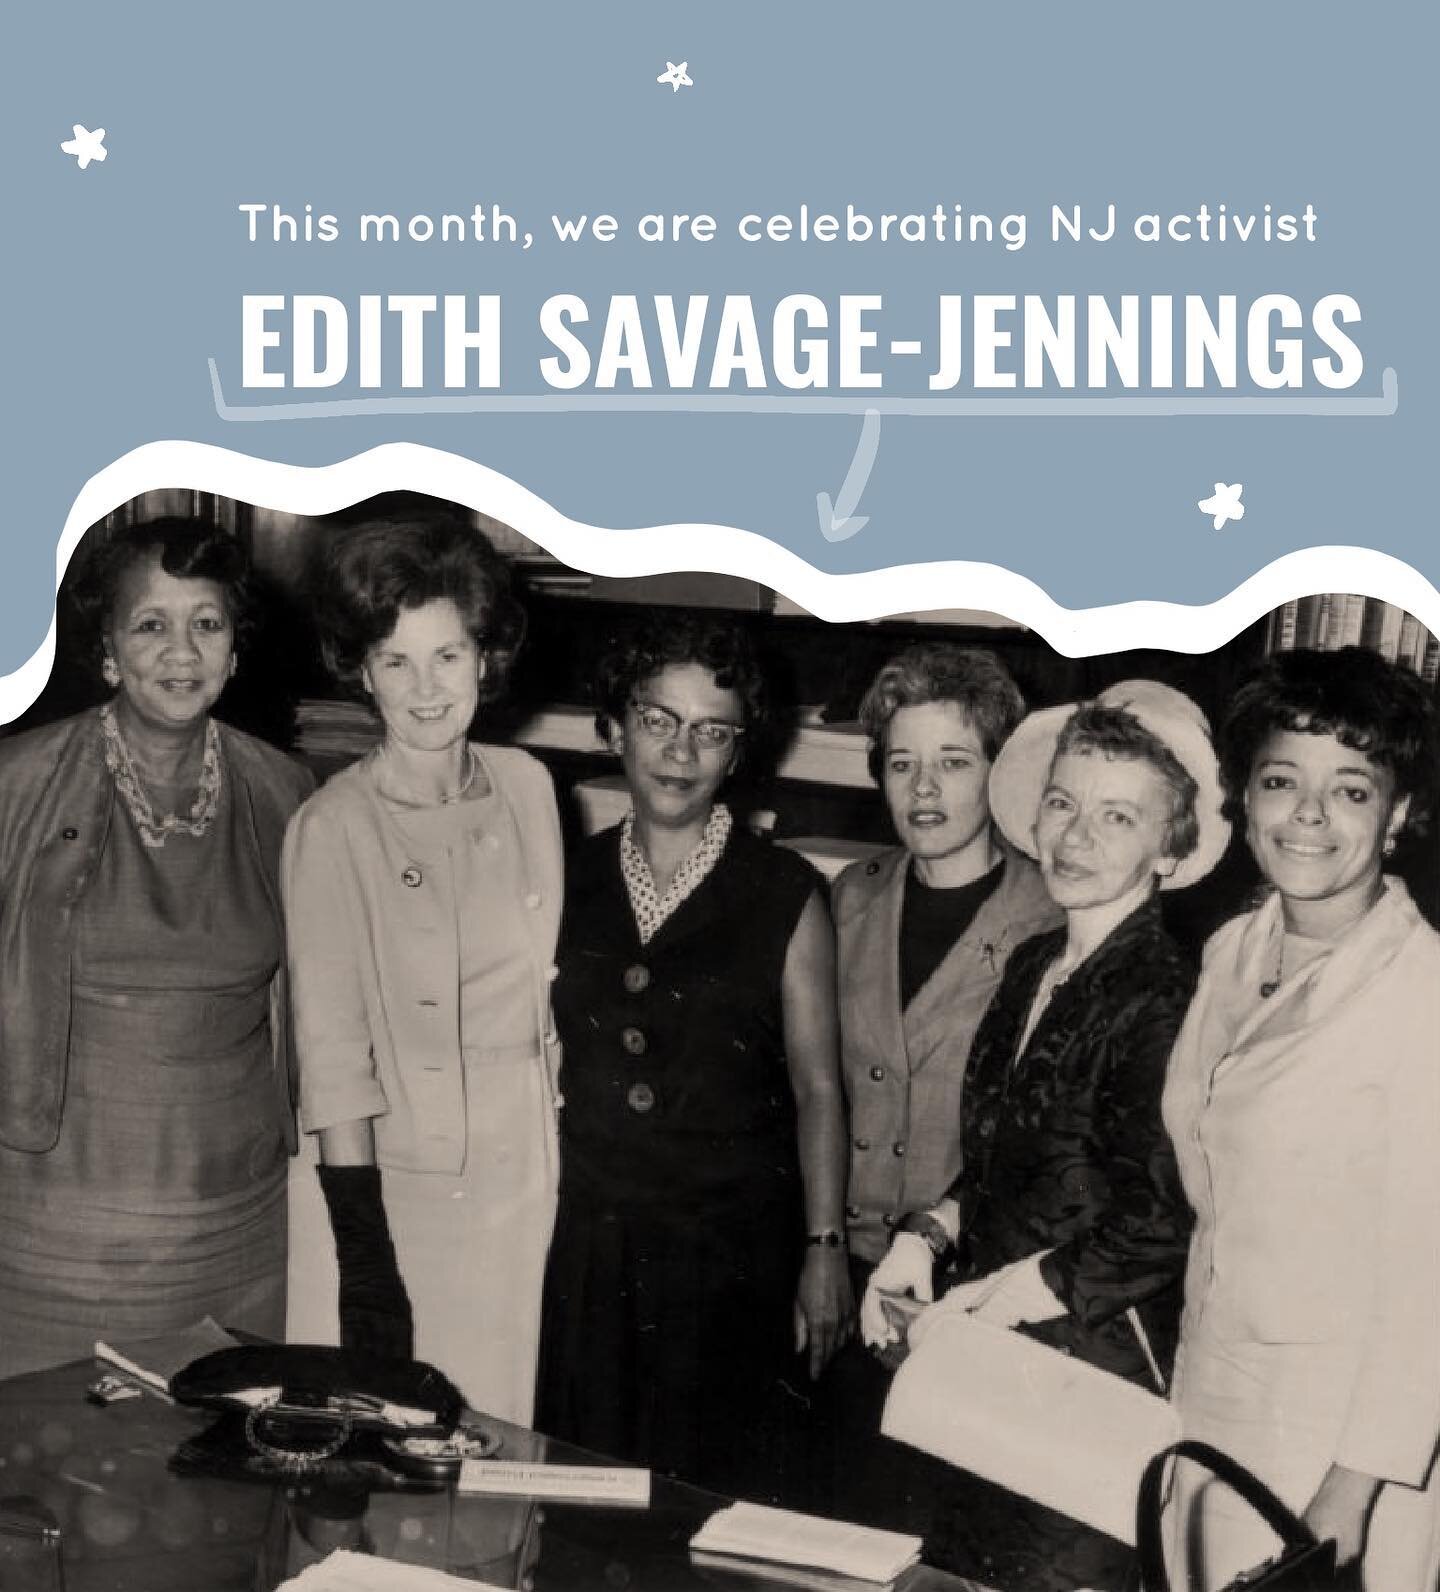 For Black History Month, we at Helping Hands are celebrating the legacy of Edith Savage-Jennings!